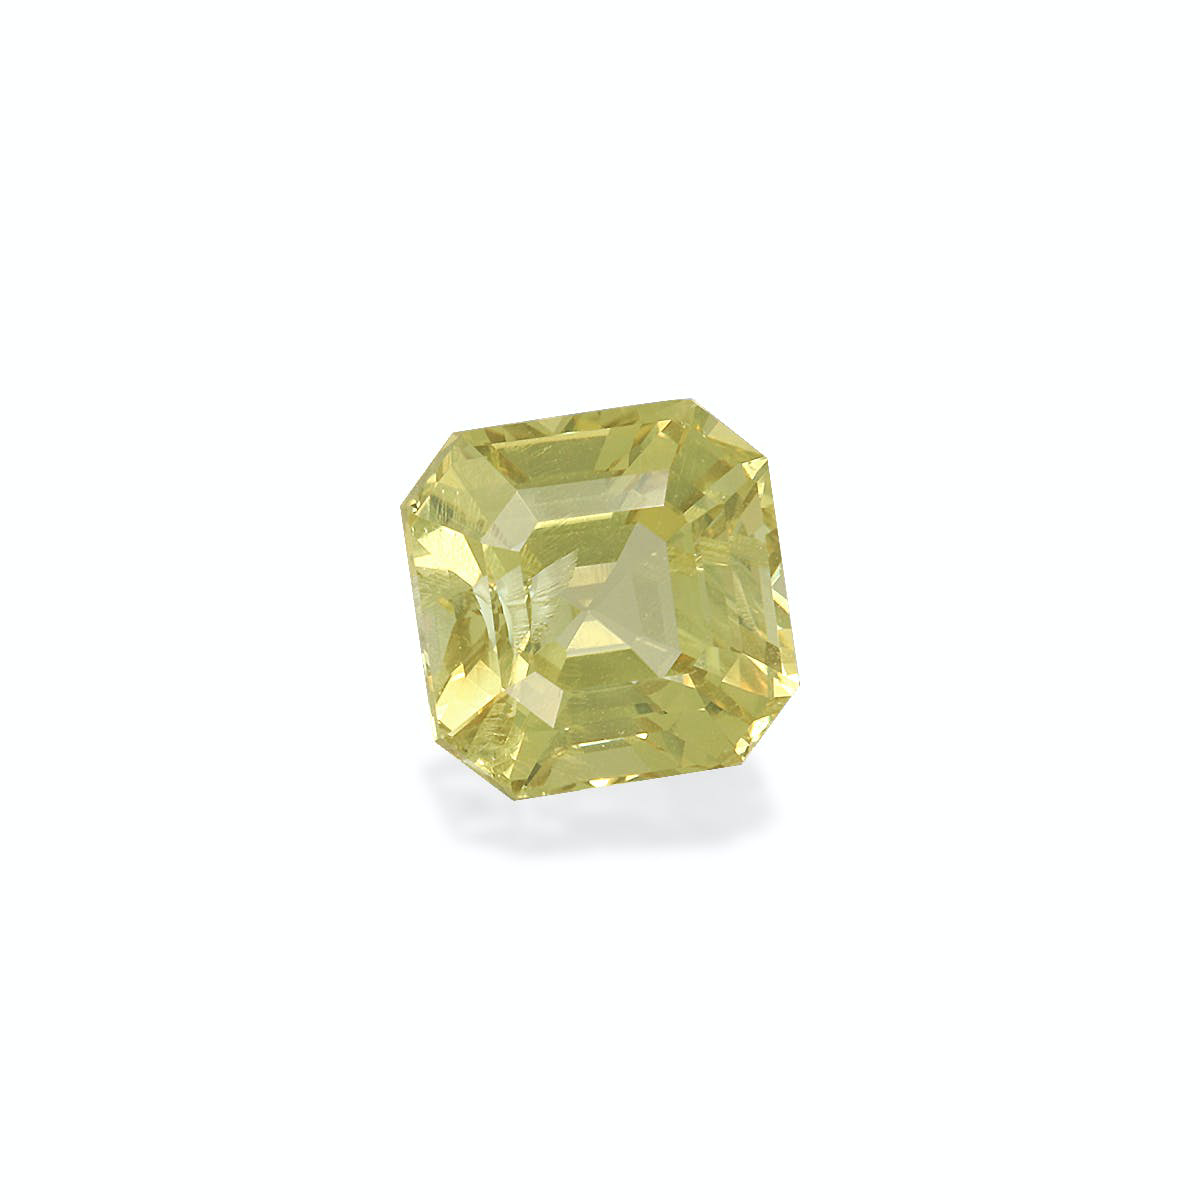 Picture of Golden Yellow Chrysoberyl 2.13ct - 6mm (CB0165)